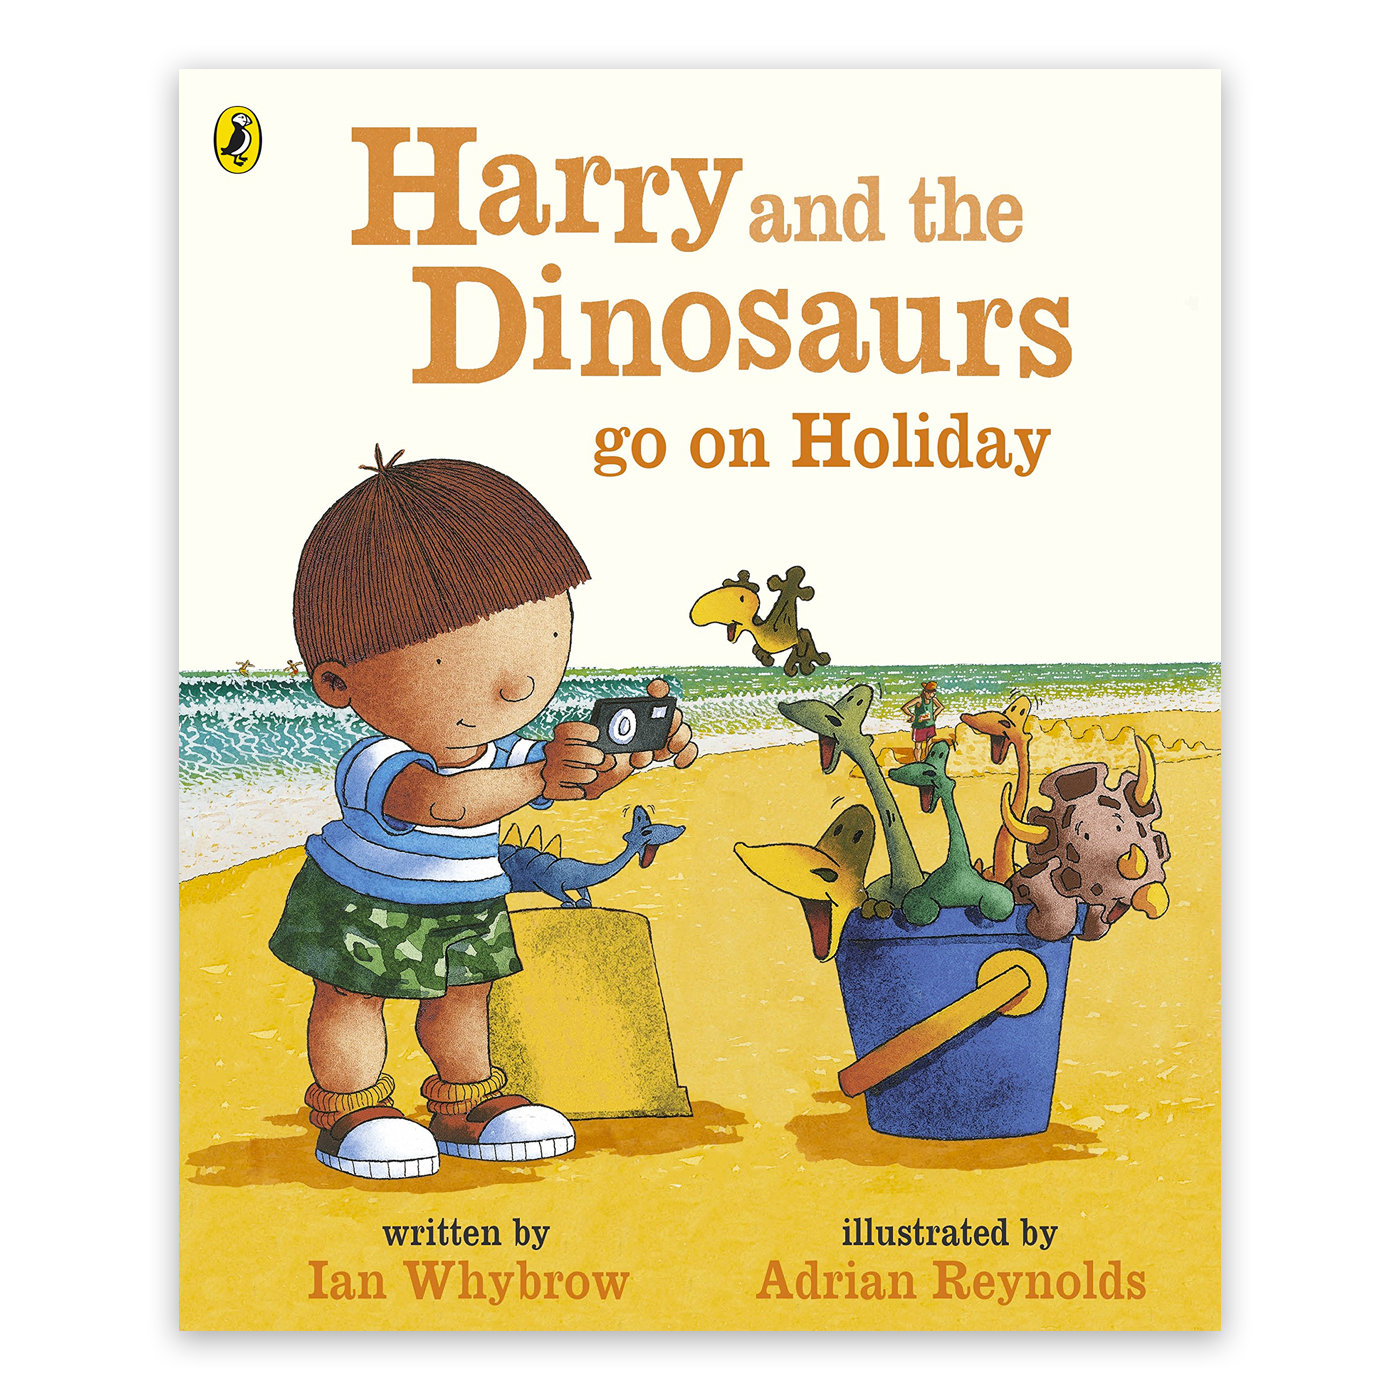  Harry and the Bucketful of Dinosaurs go on Holiday